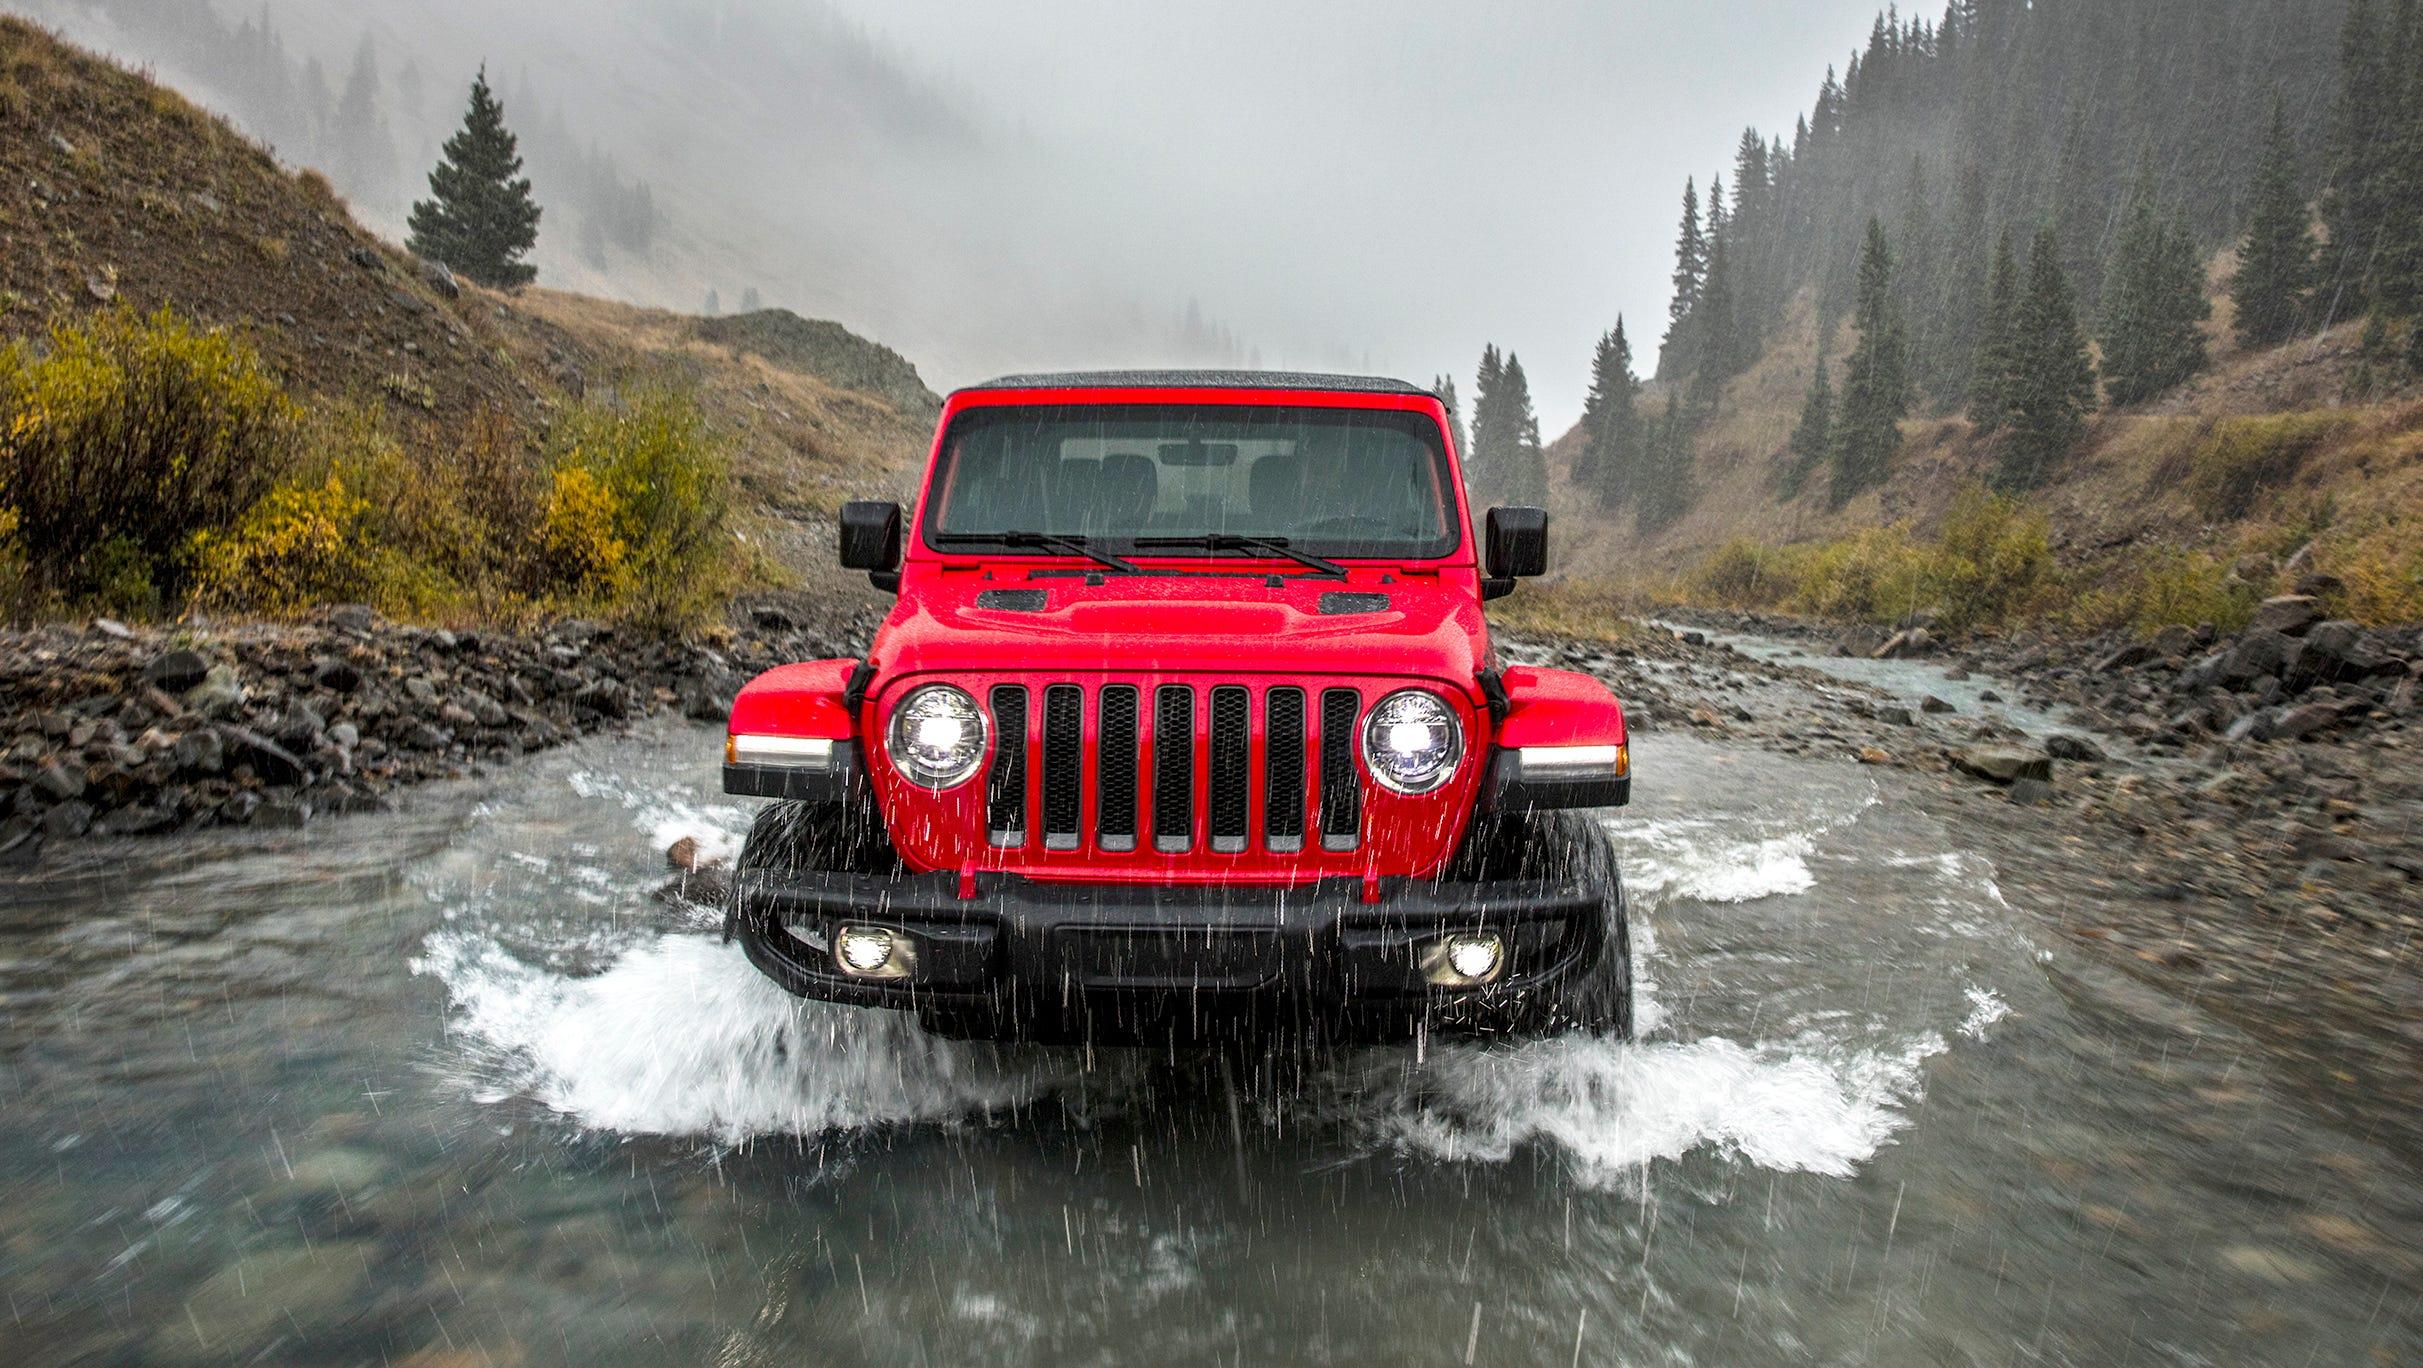 Fca Keeps New Jeep Wrangler Iconic And Adds Modern Touches